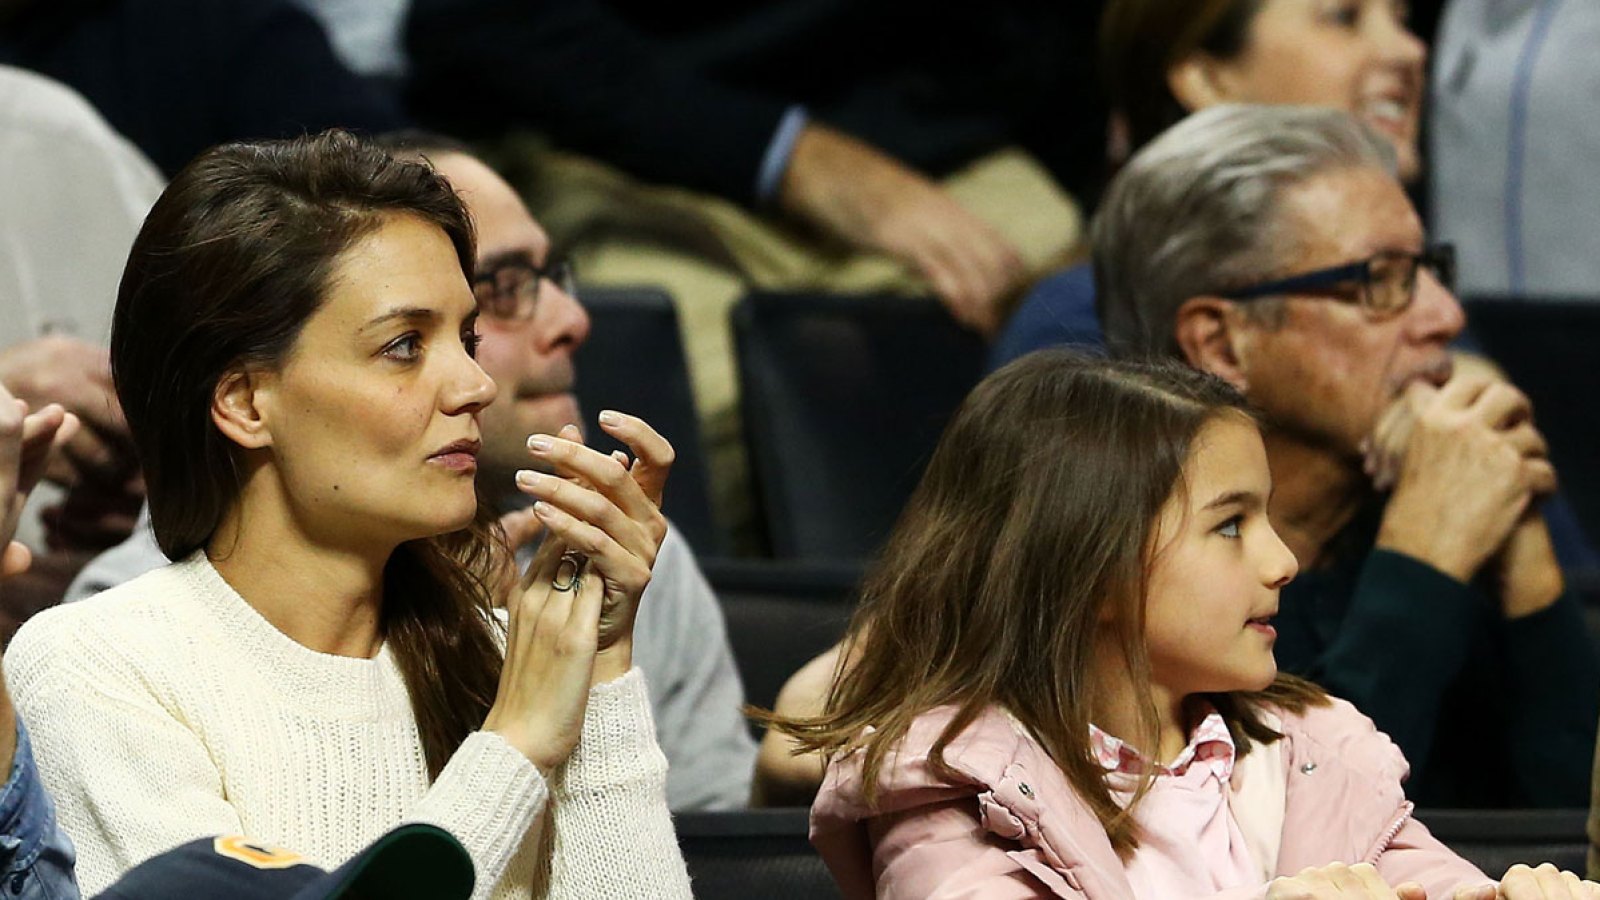 Katie Holmes and Suri Cruise watch a Notre Dame game